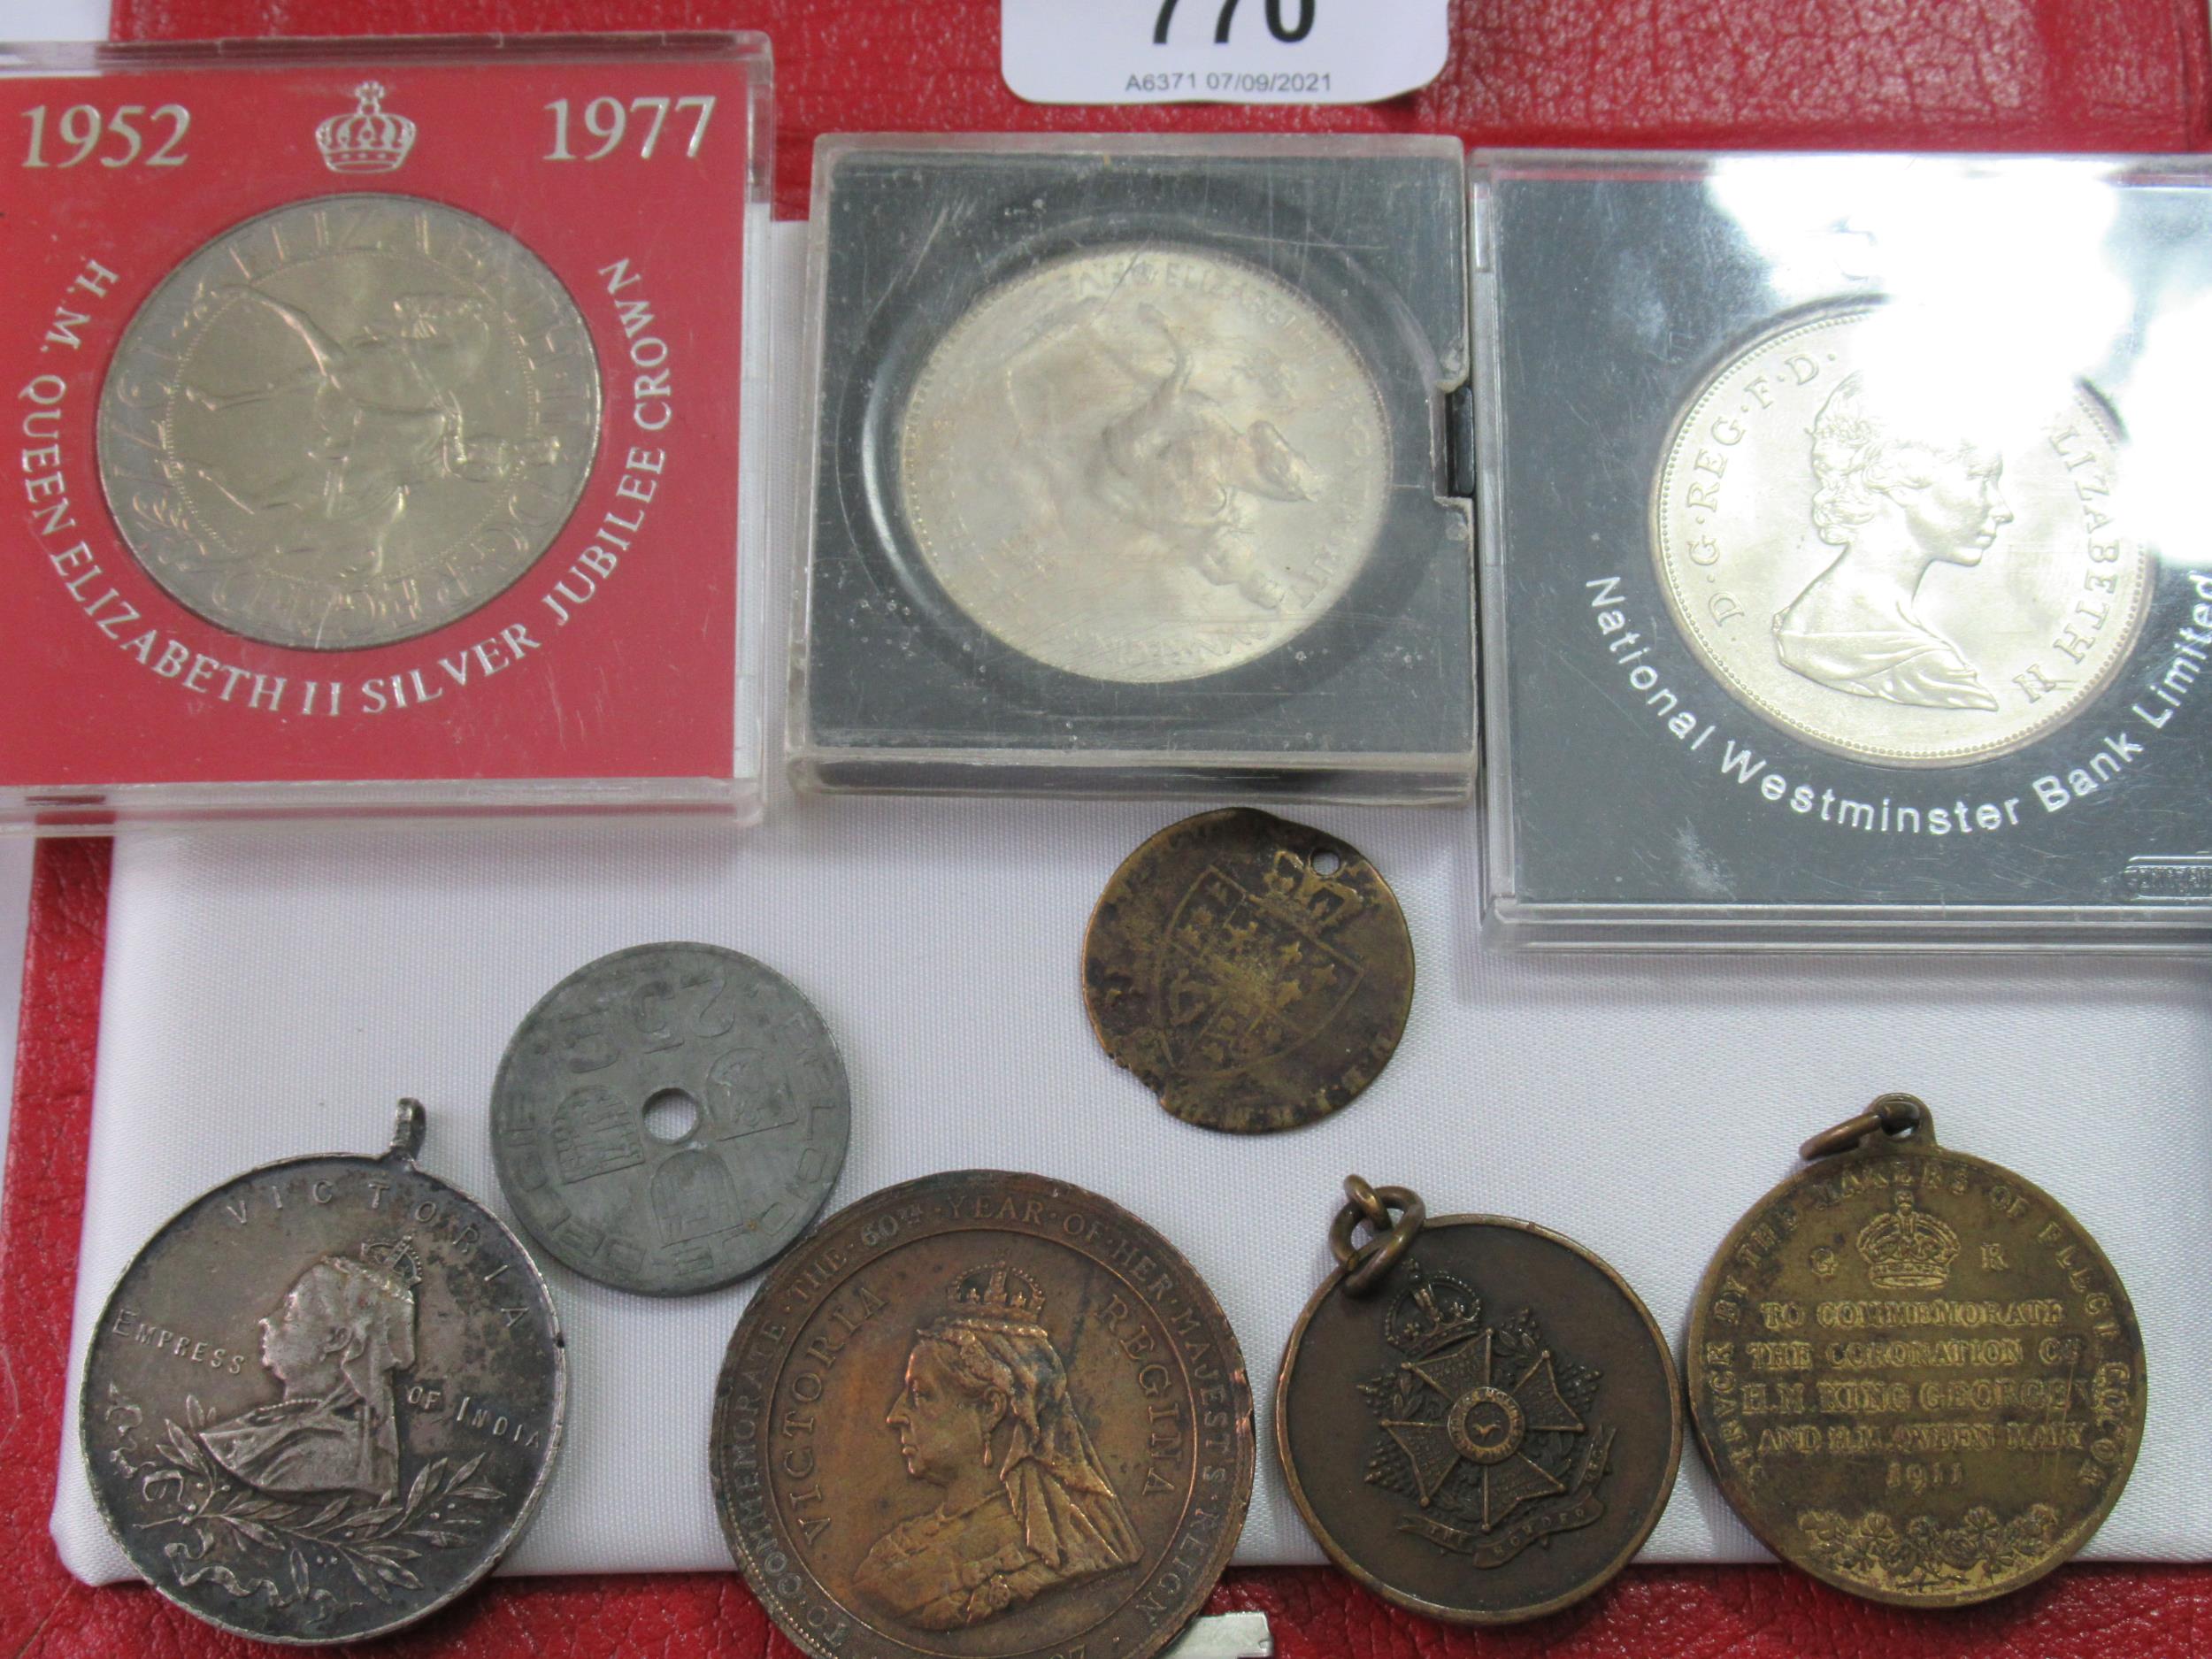 1989 Proof coin set together with a large quantity of other miscellaneous coins - Image 3 of 3